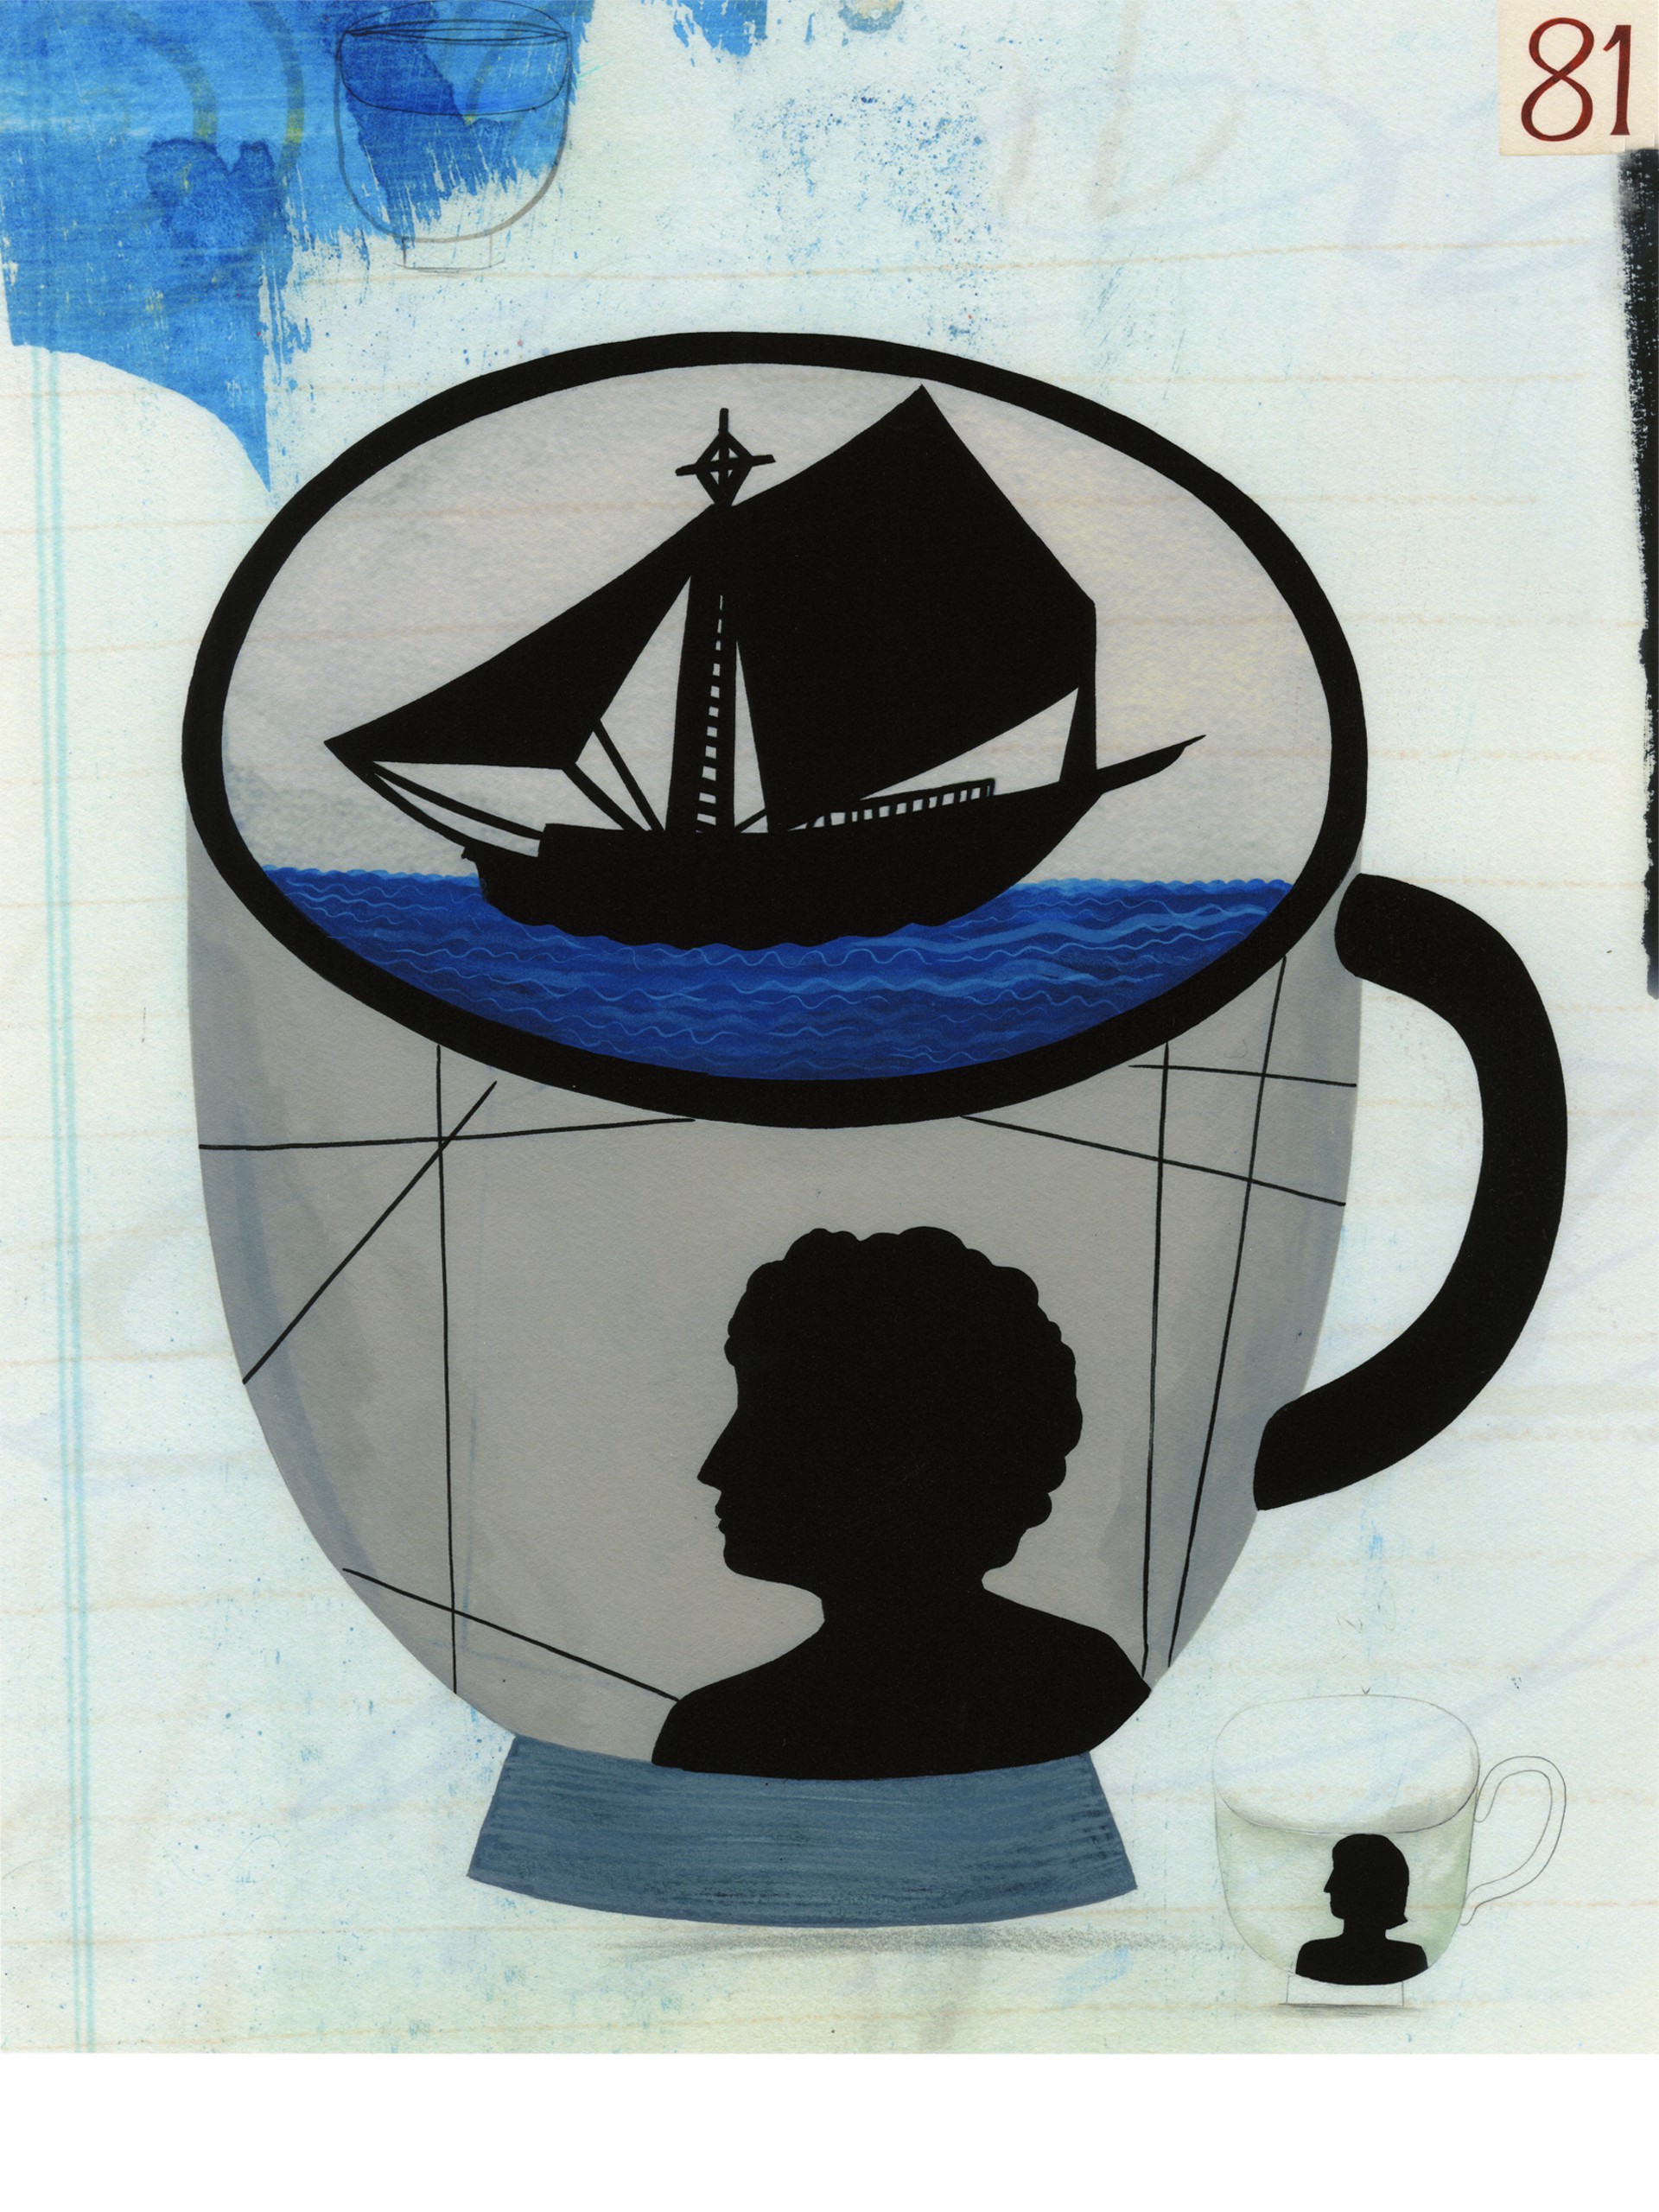 Cup No. 81 by Anne Smith